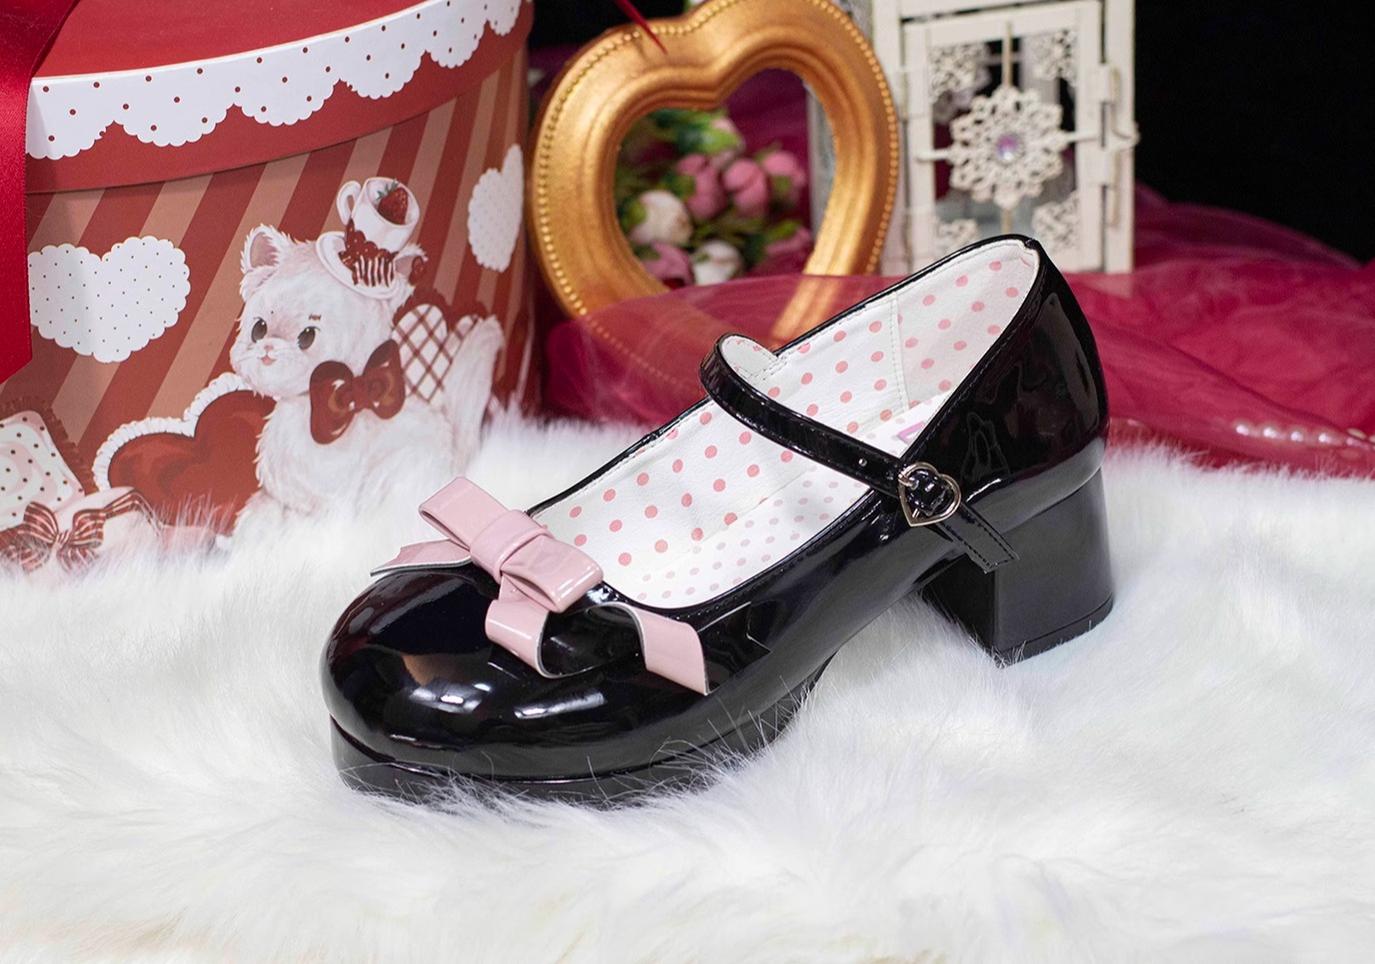 Dolly Doll~Lovers' Gift~Round Toe Middle Heel Mary Jane Lolita Shoes   